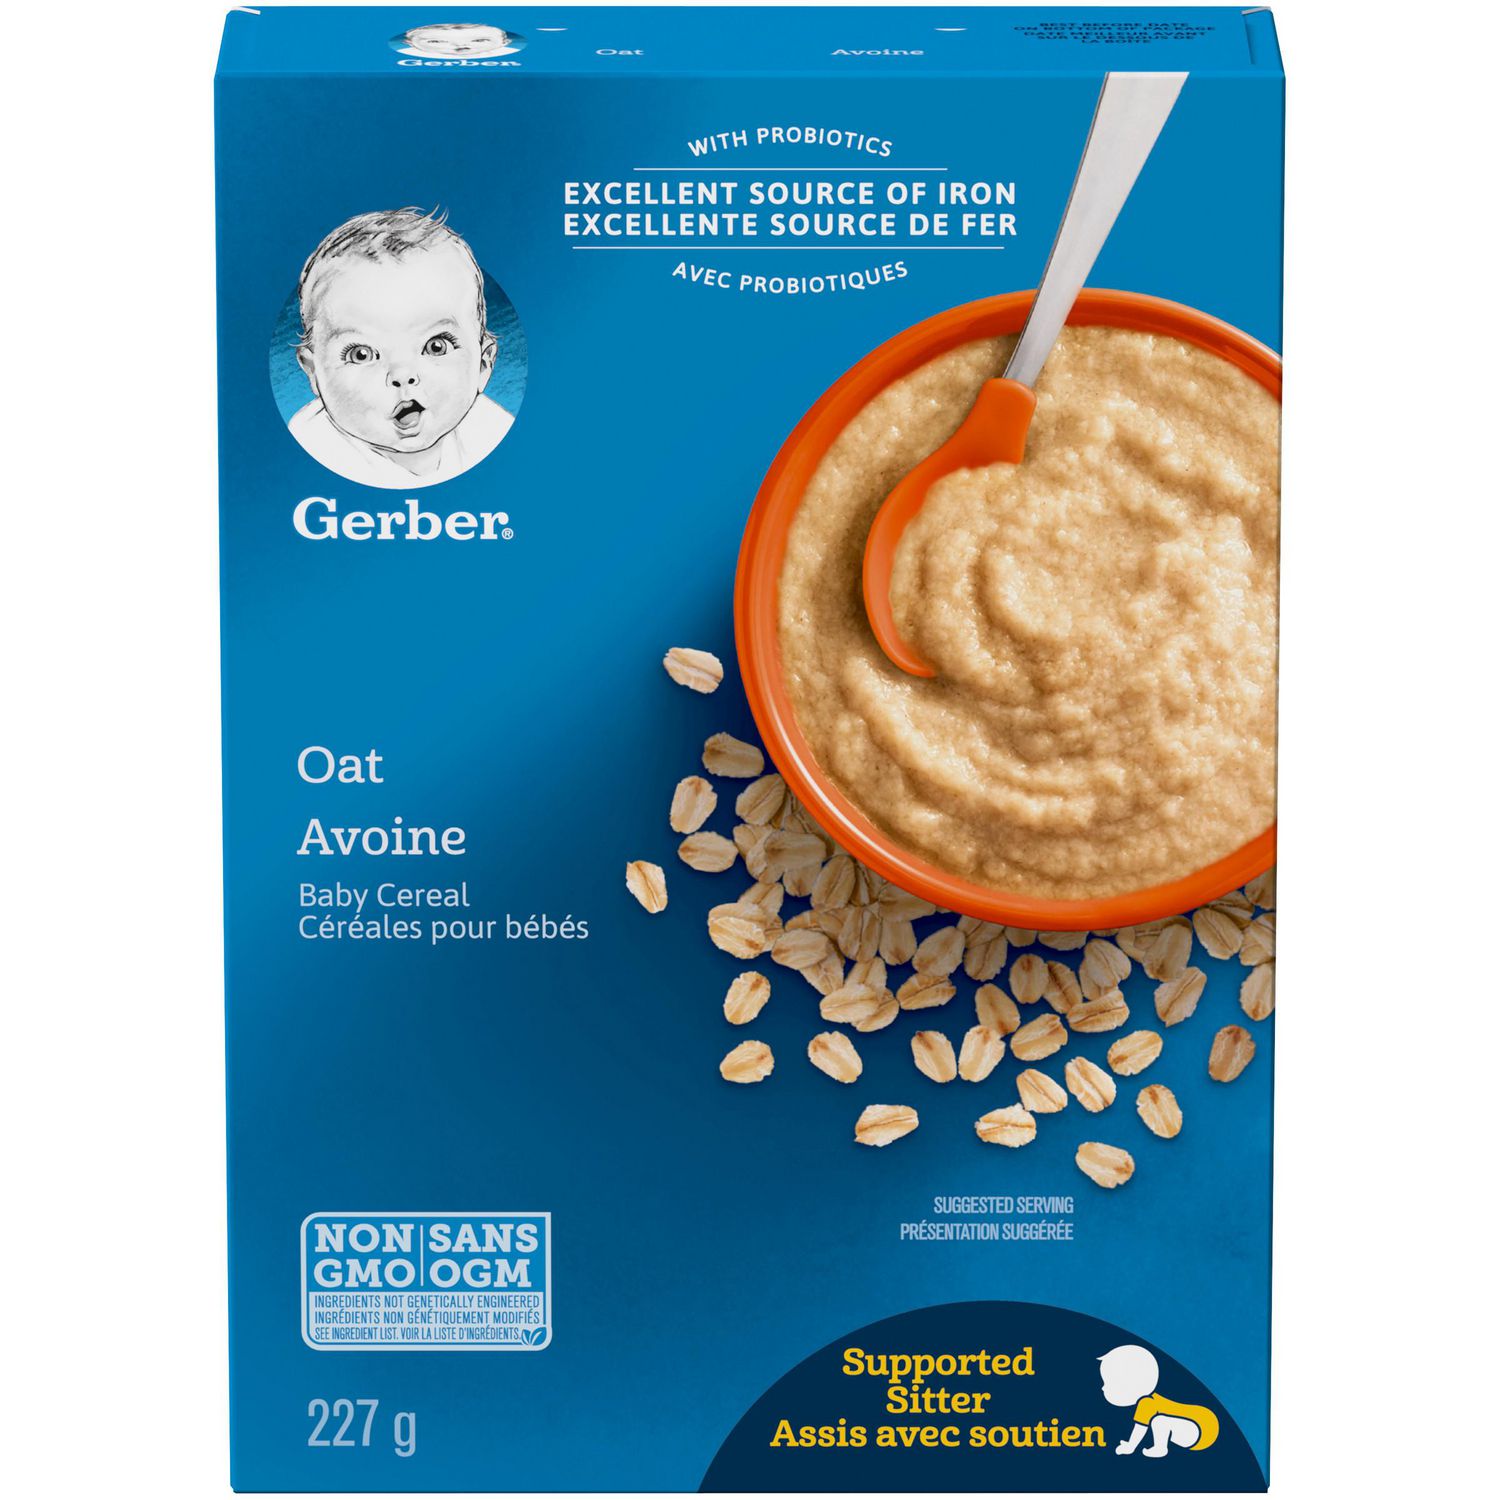 infant oatmeal cereal